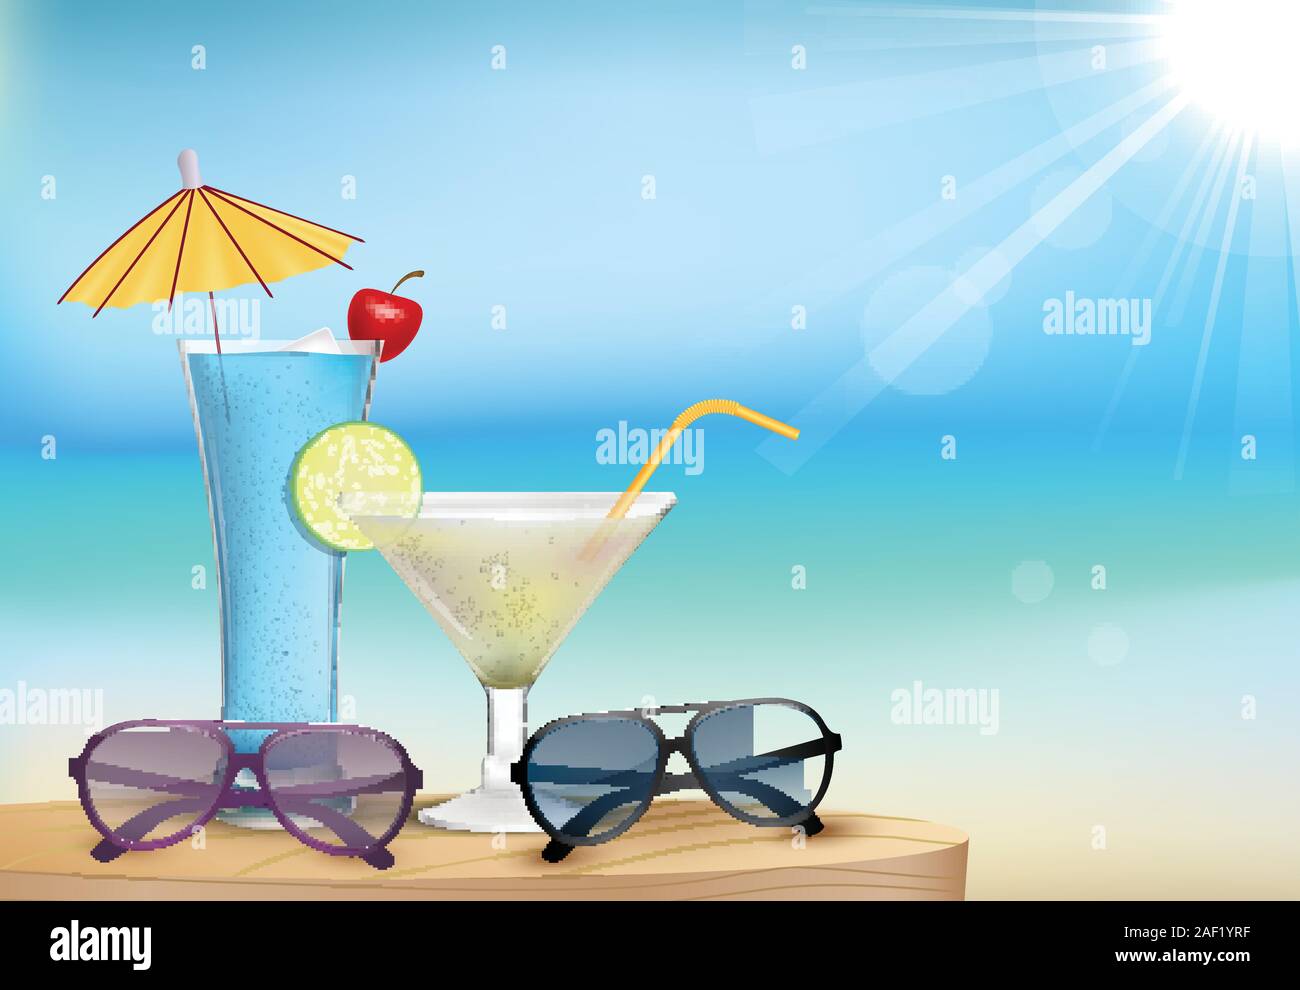 Illustration of Summer beach with juice and glasses Stock Vector